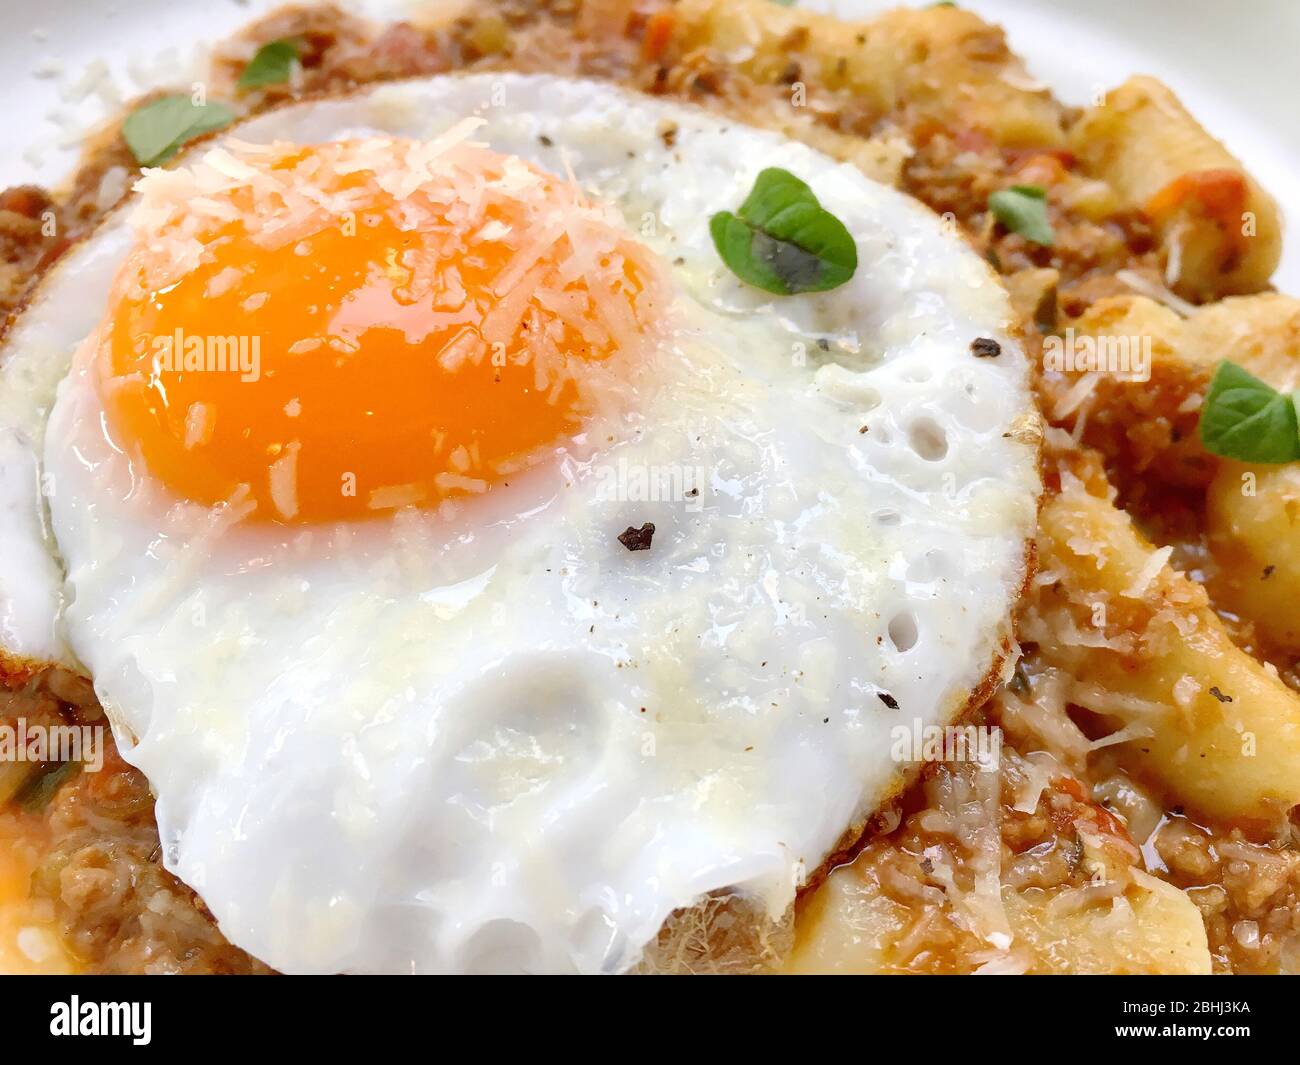 Over easy fried egg with cheese sprinkled on top of Italian food Stock Photo